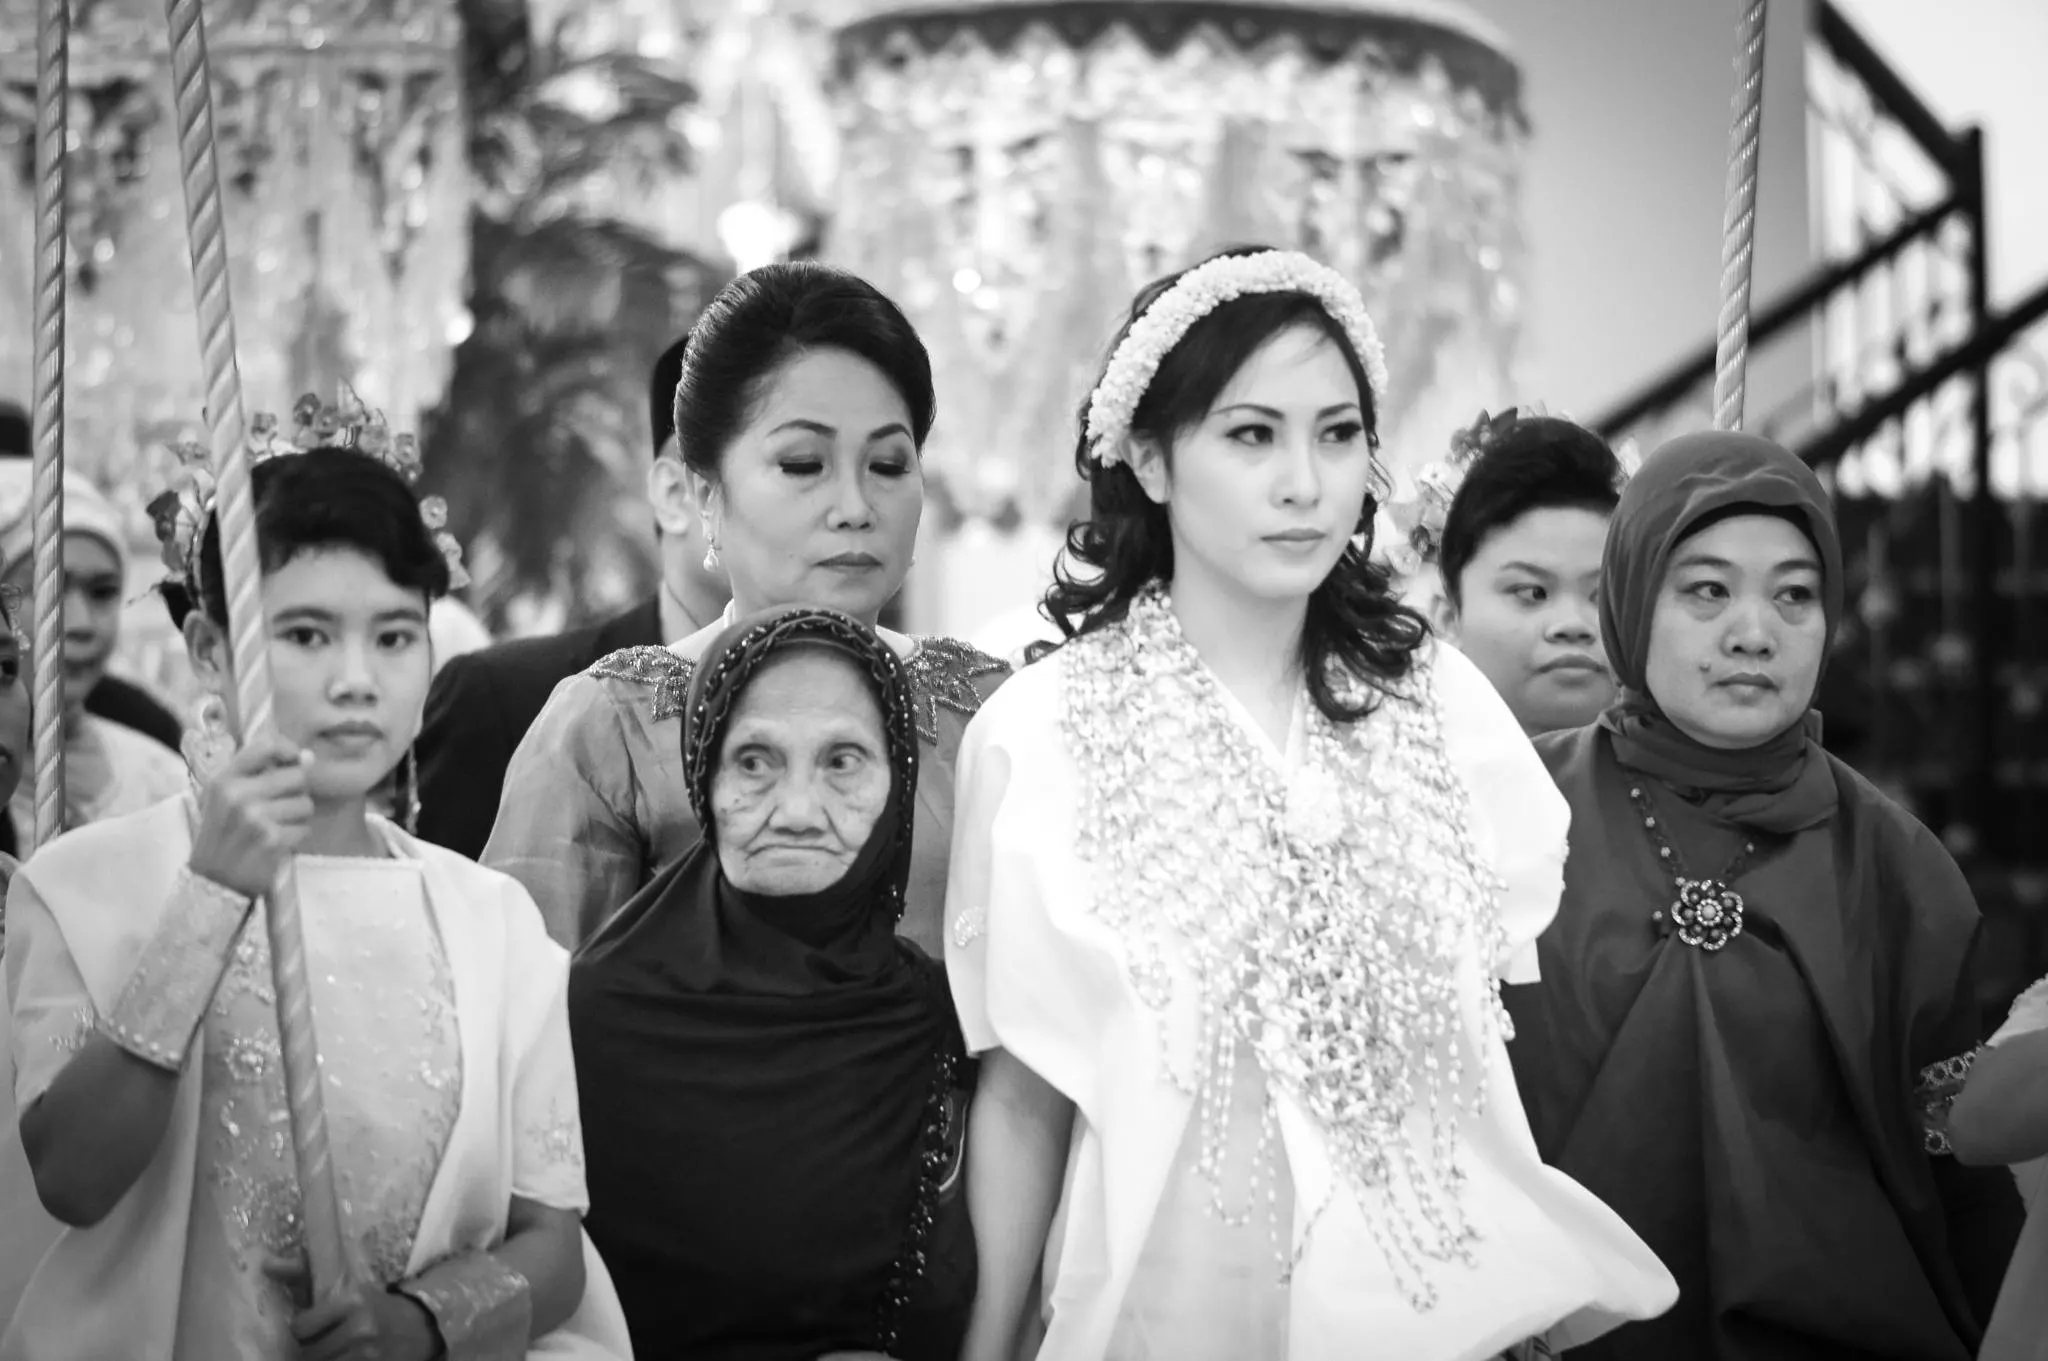 The bride-to-be enters the Mappasili, a cleansing ceremony to prepare her for entering married life.